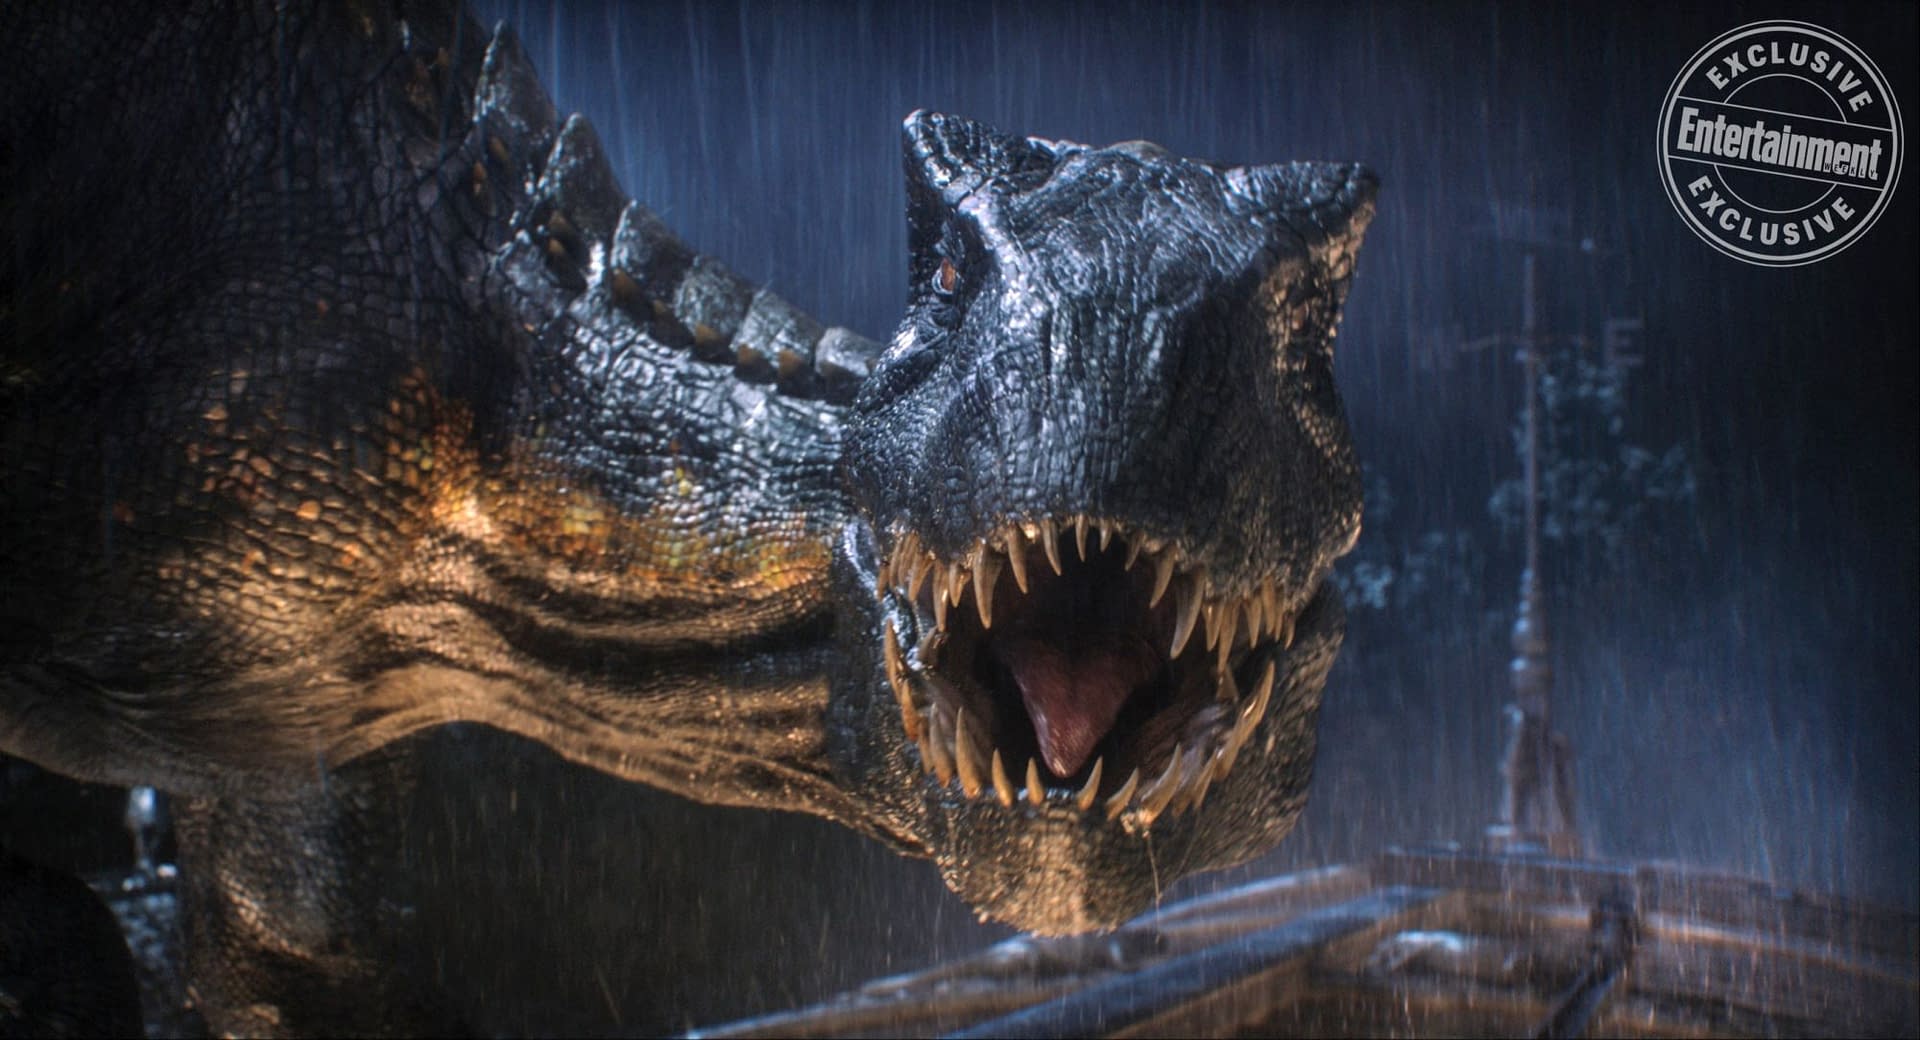 6 New Images from Jurassic World: Fallen Kingdom for the EW Summer Preview